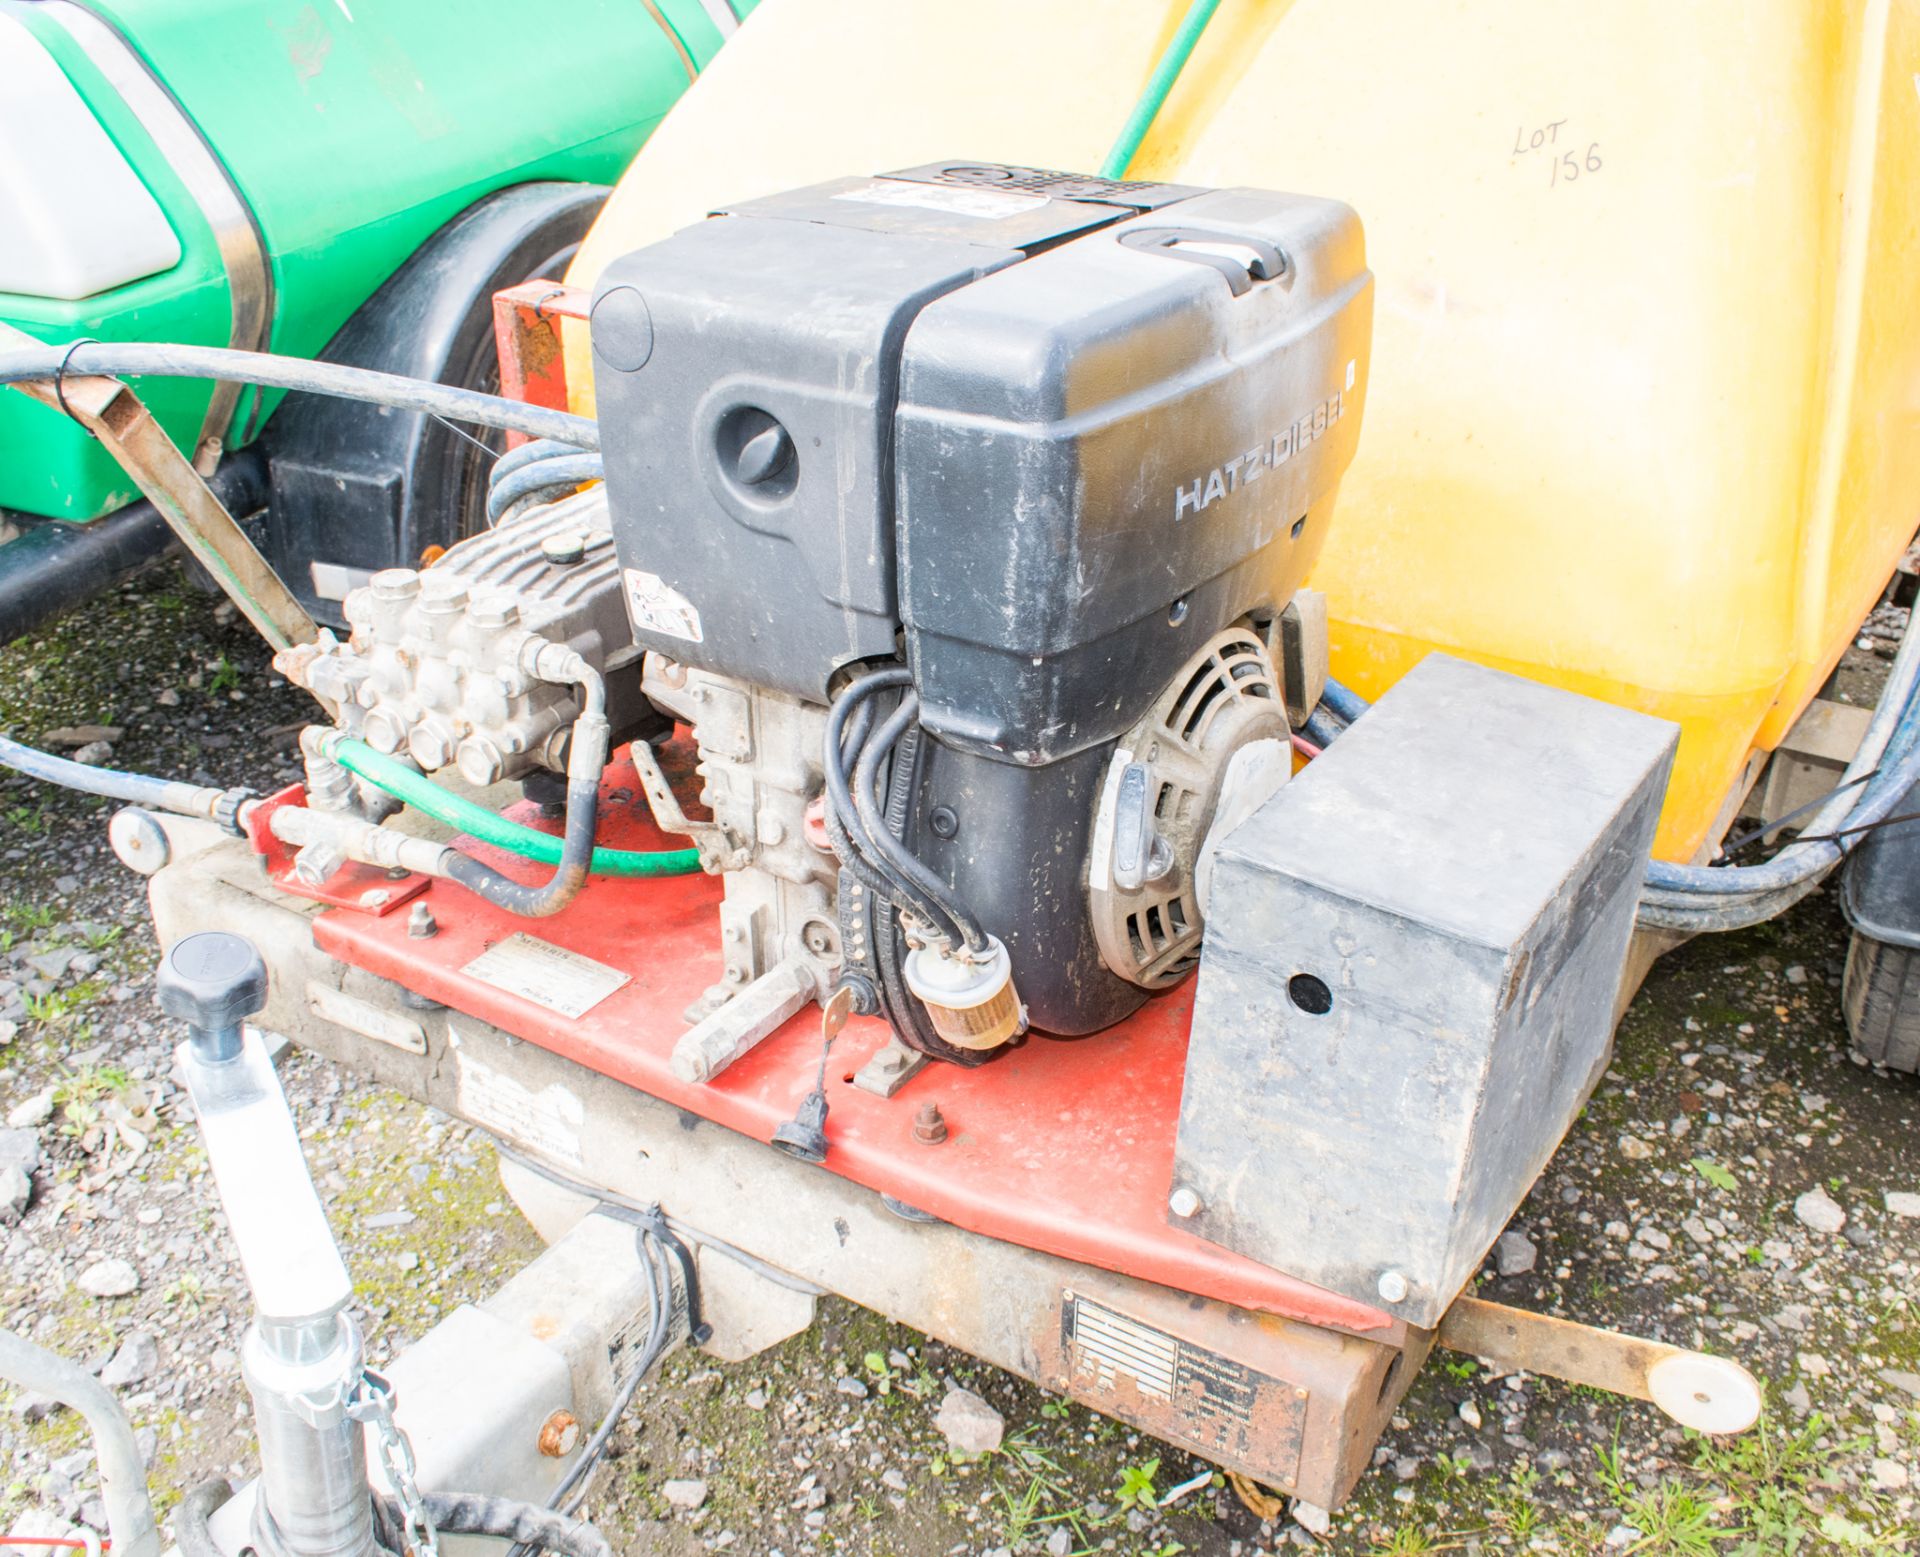 Western diesel driven fast tow water bowser/pressure washer c/w hose & lance A607207 - Image 3 of 4